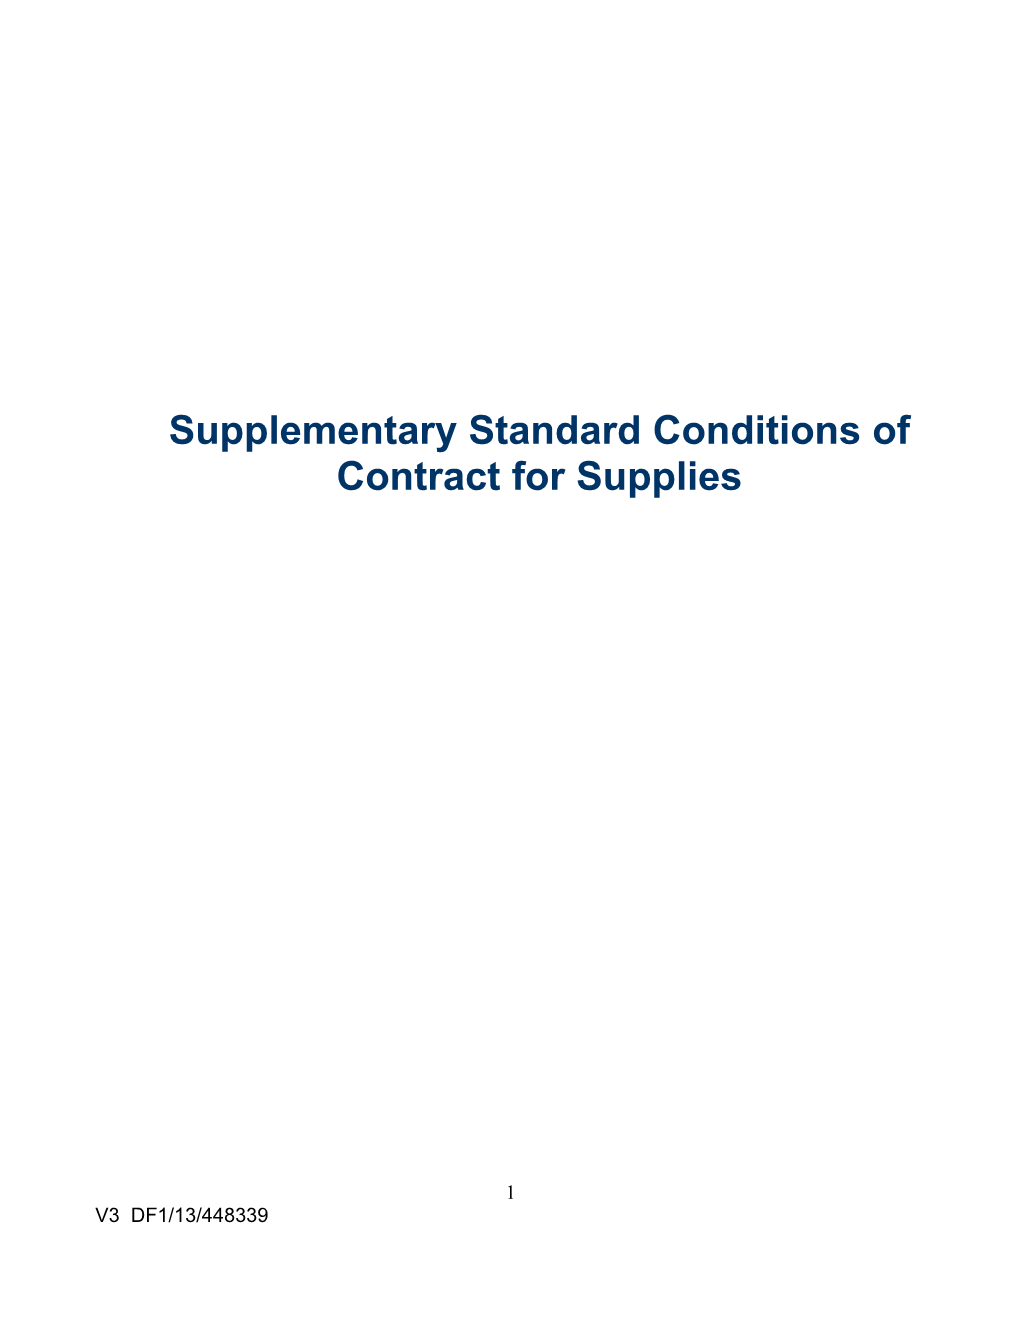 Supplementary Standard Conditions of Contract for Supplies